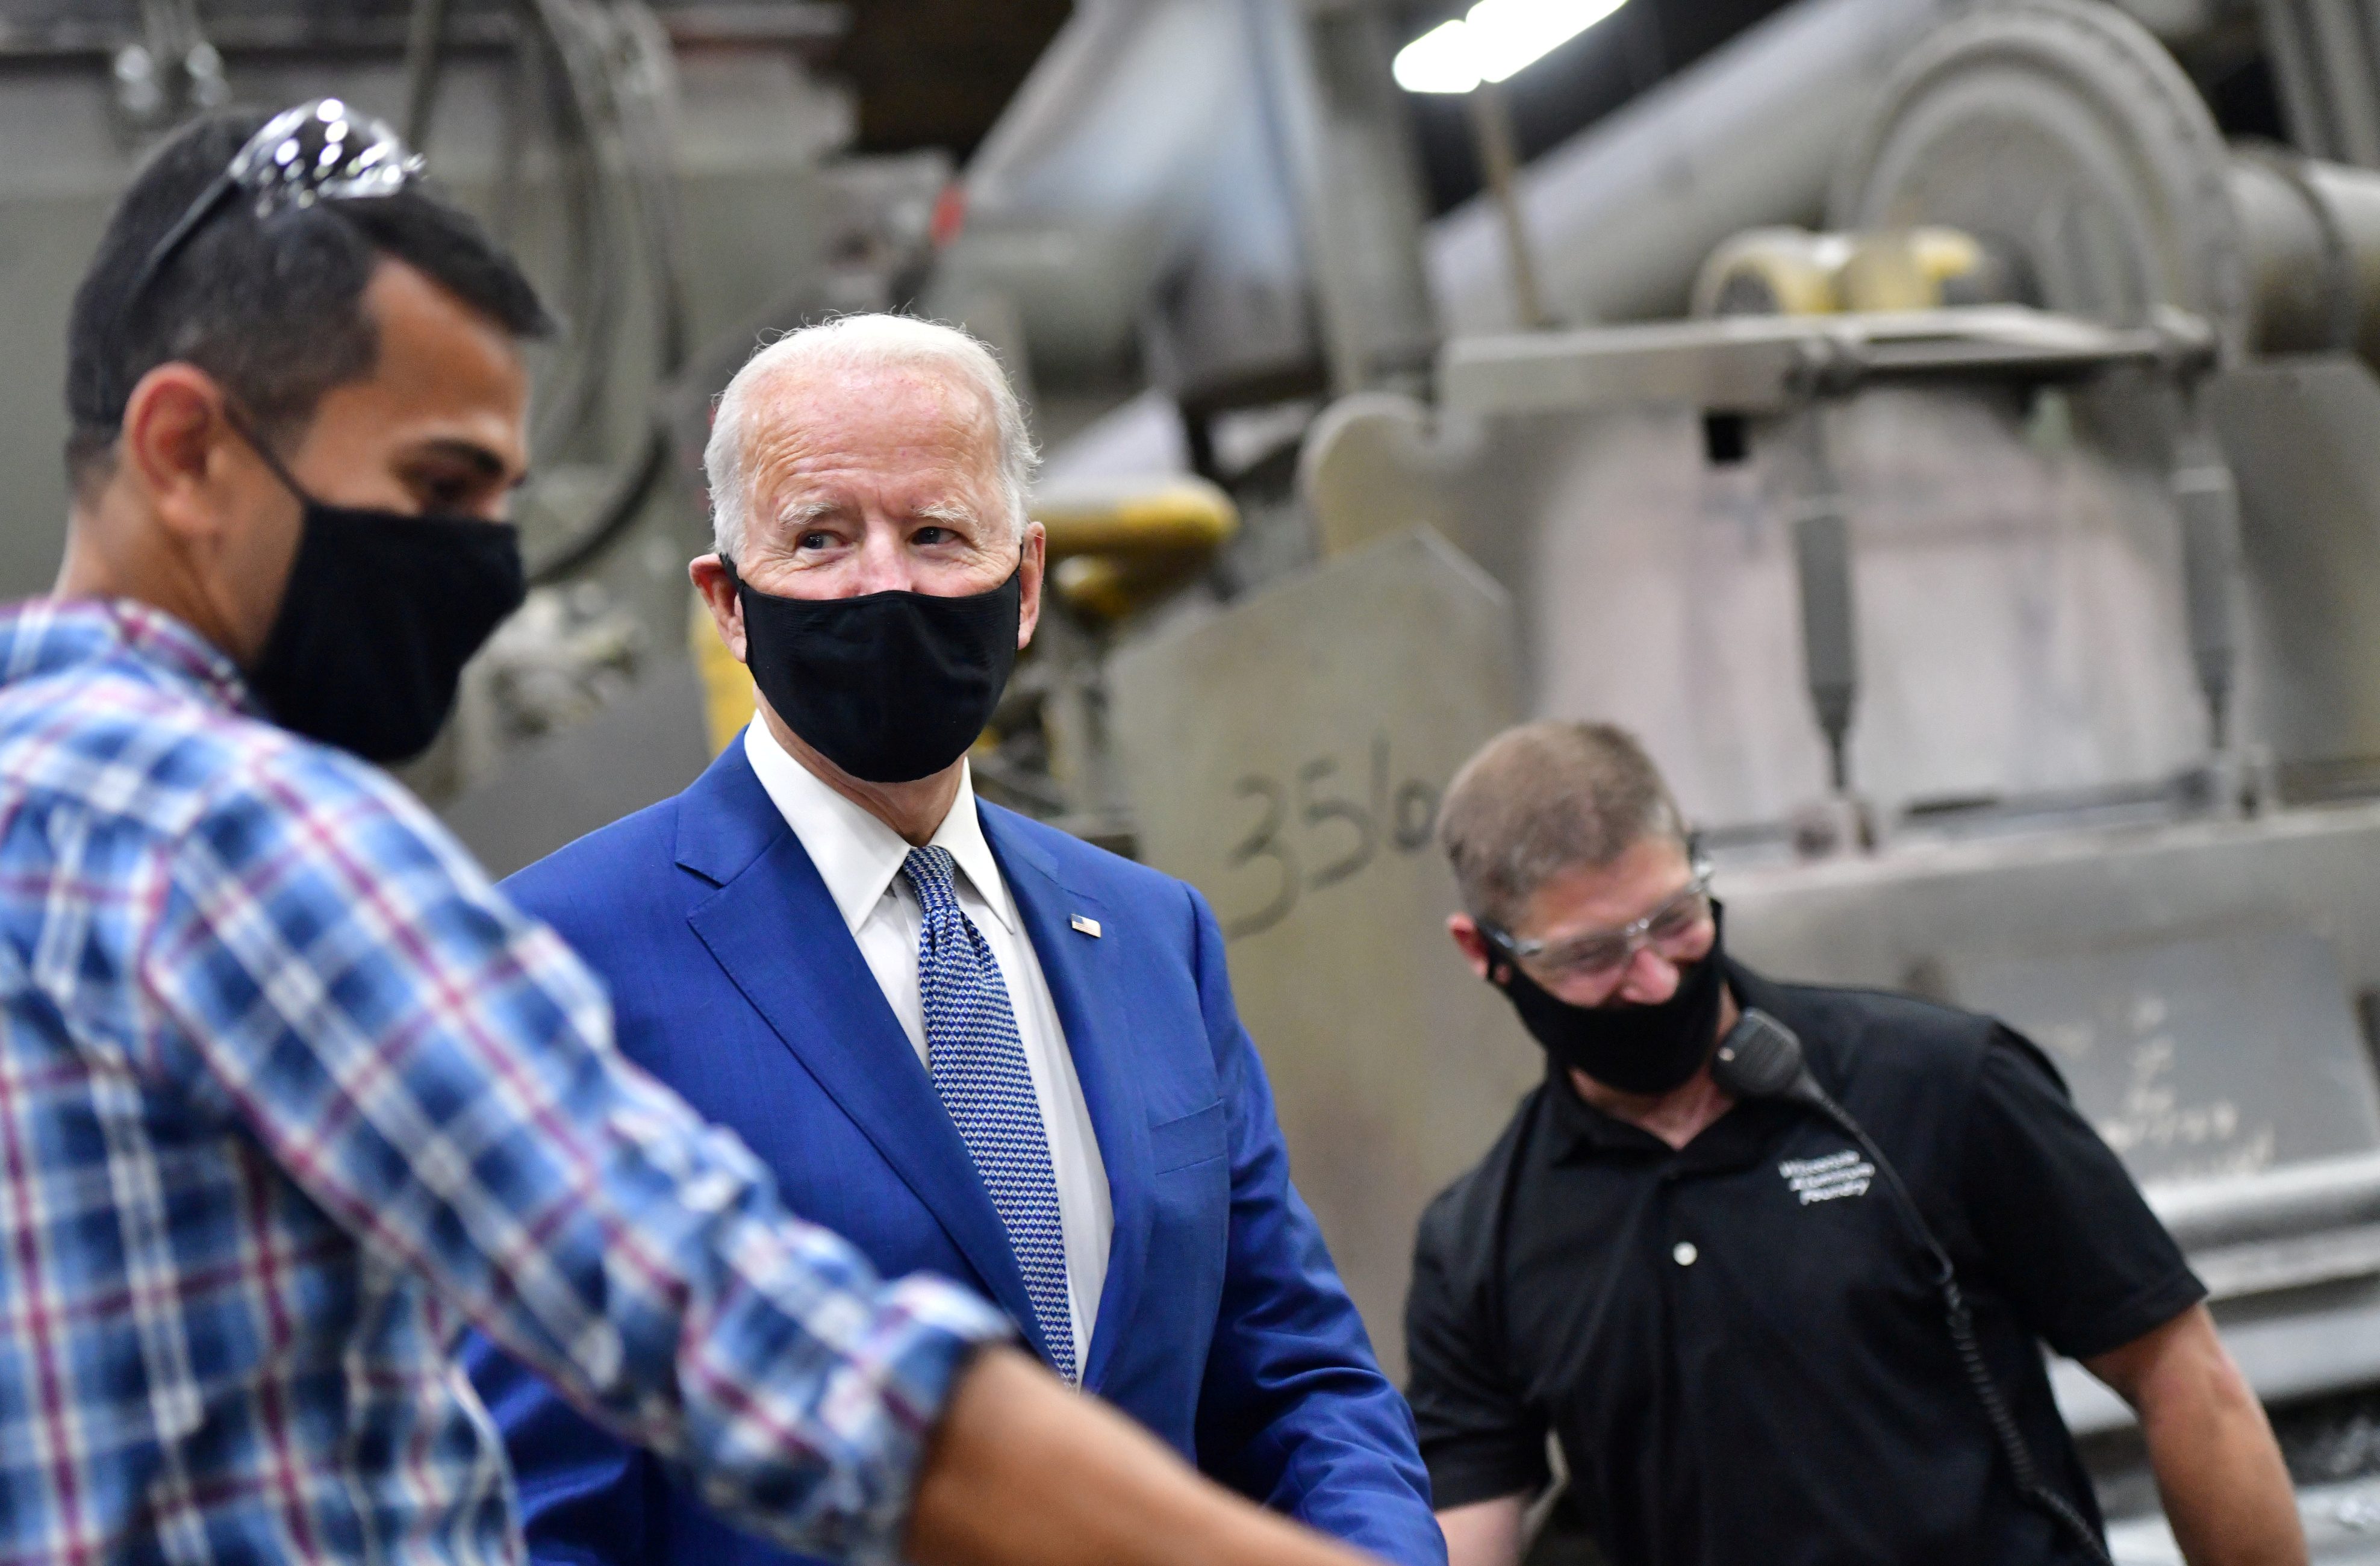 Biden’s first year could see record employment growth but more will be needed